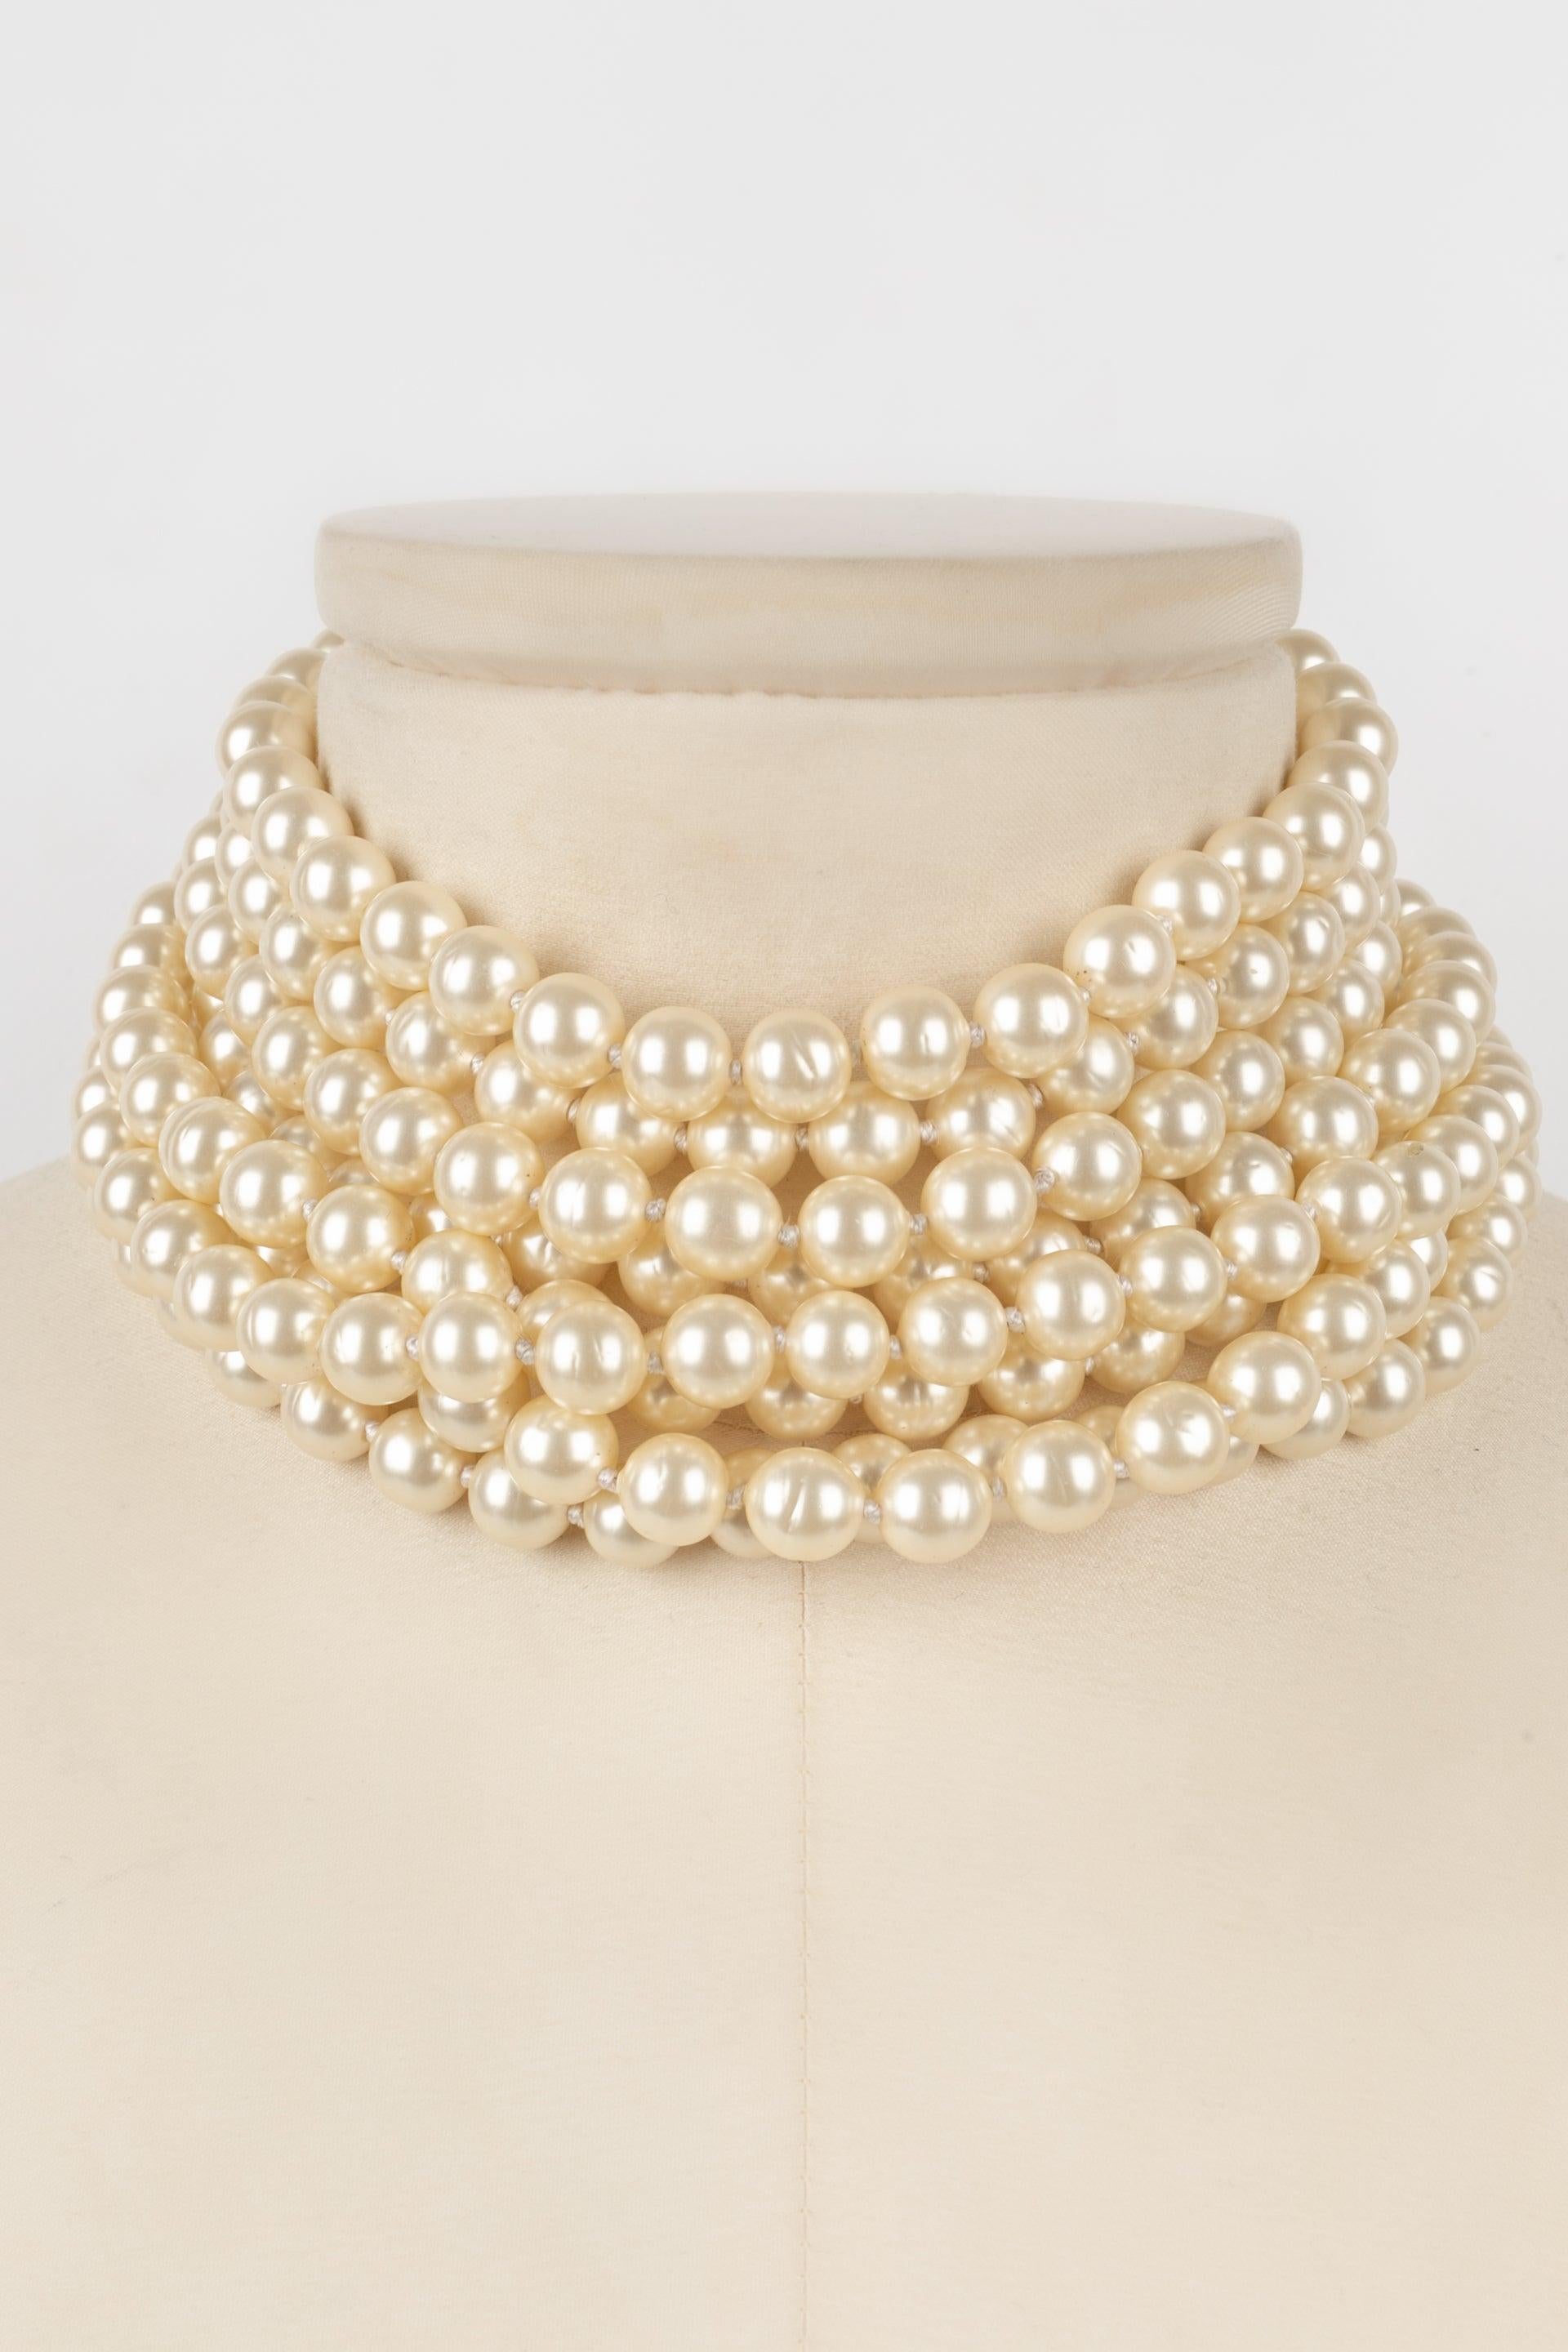 Women's Chanel Eight-row Choker Necklace with Costume Pearls